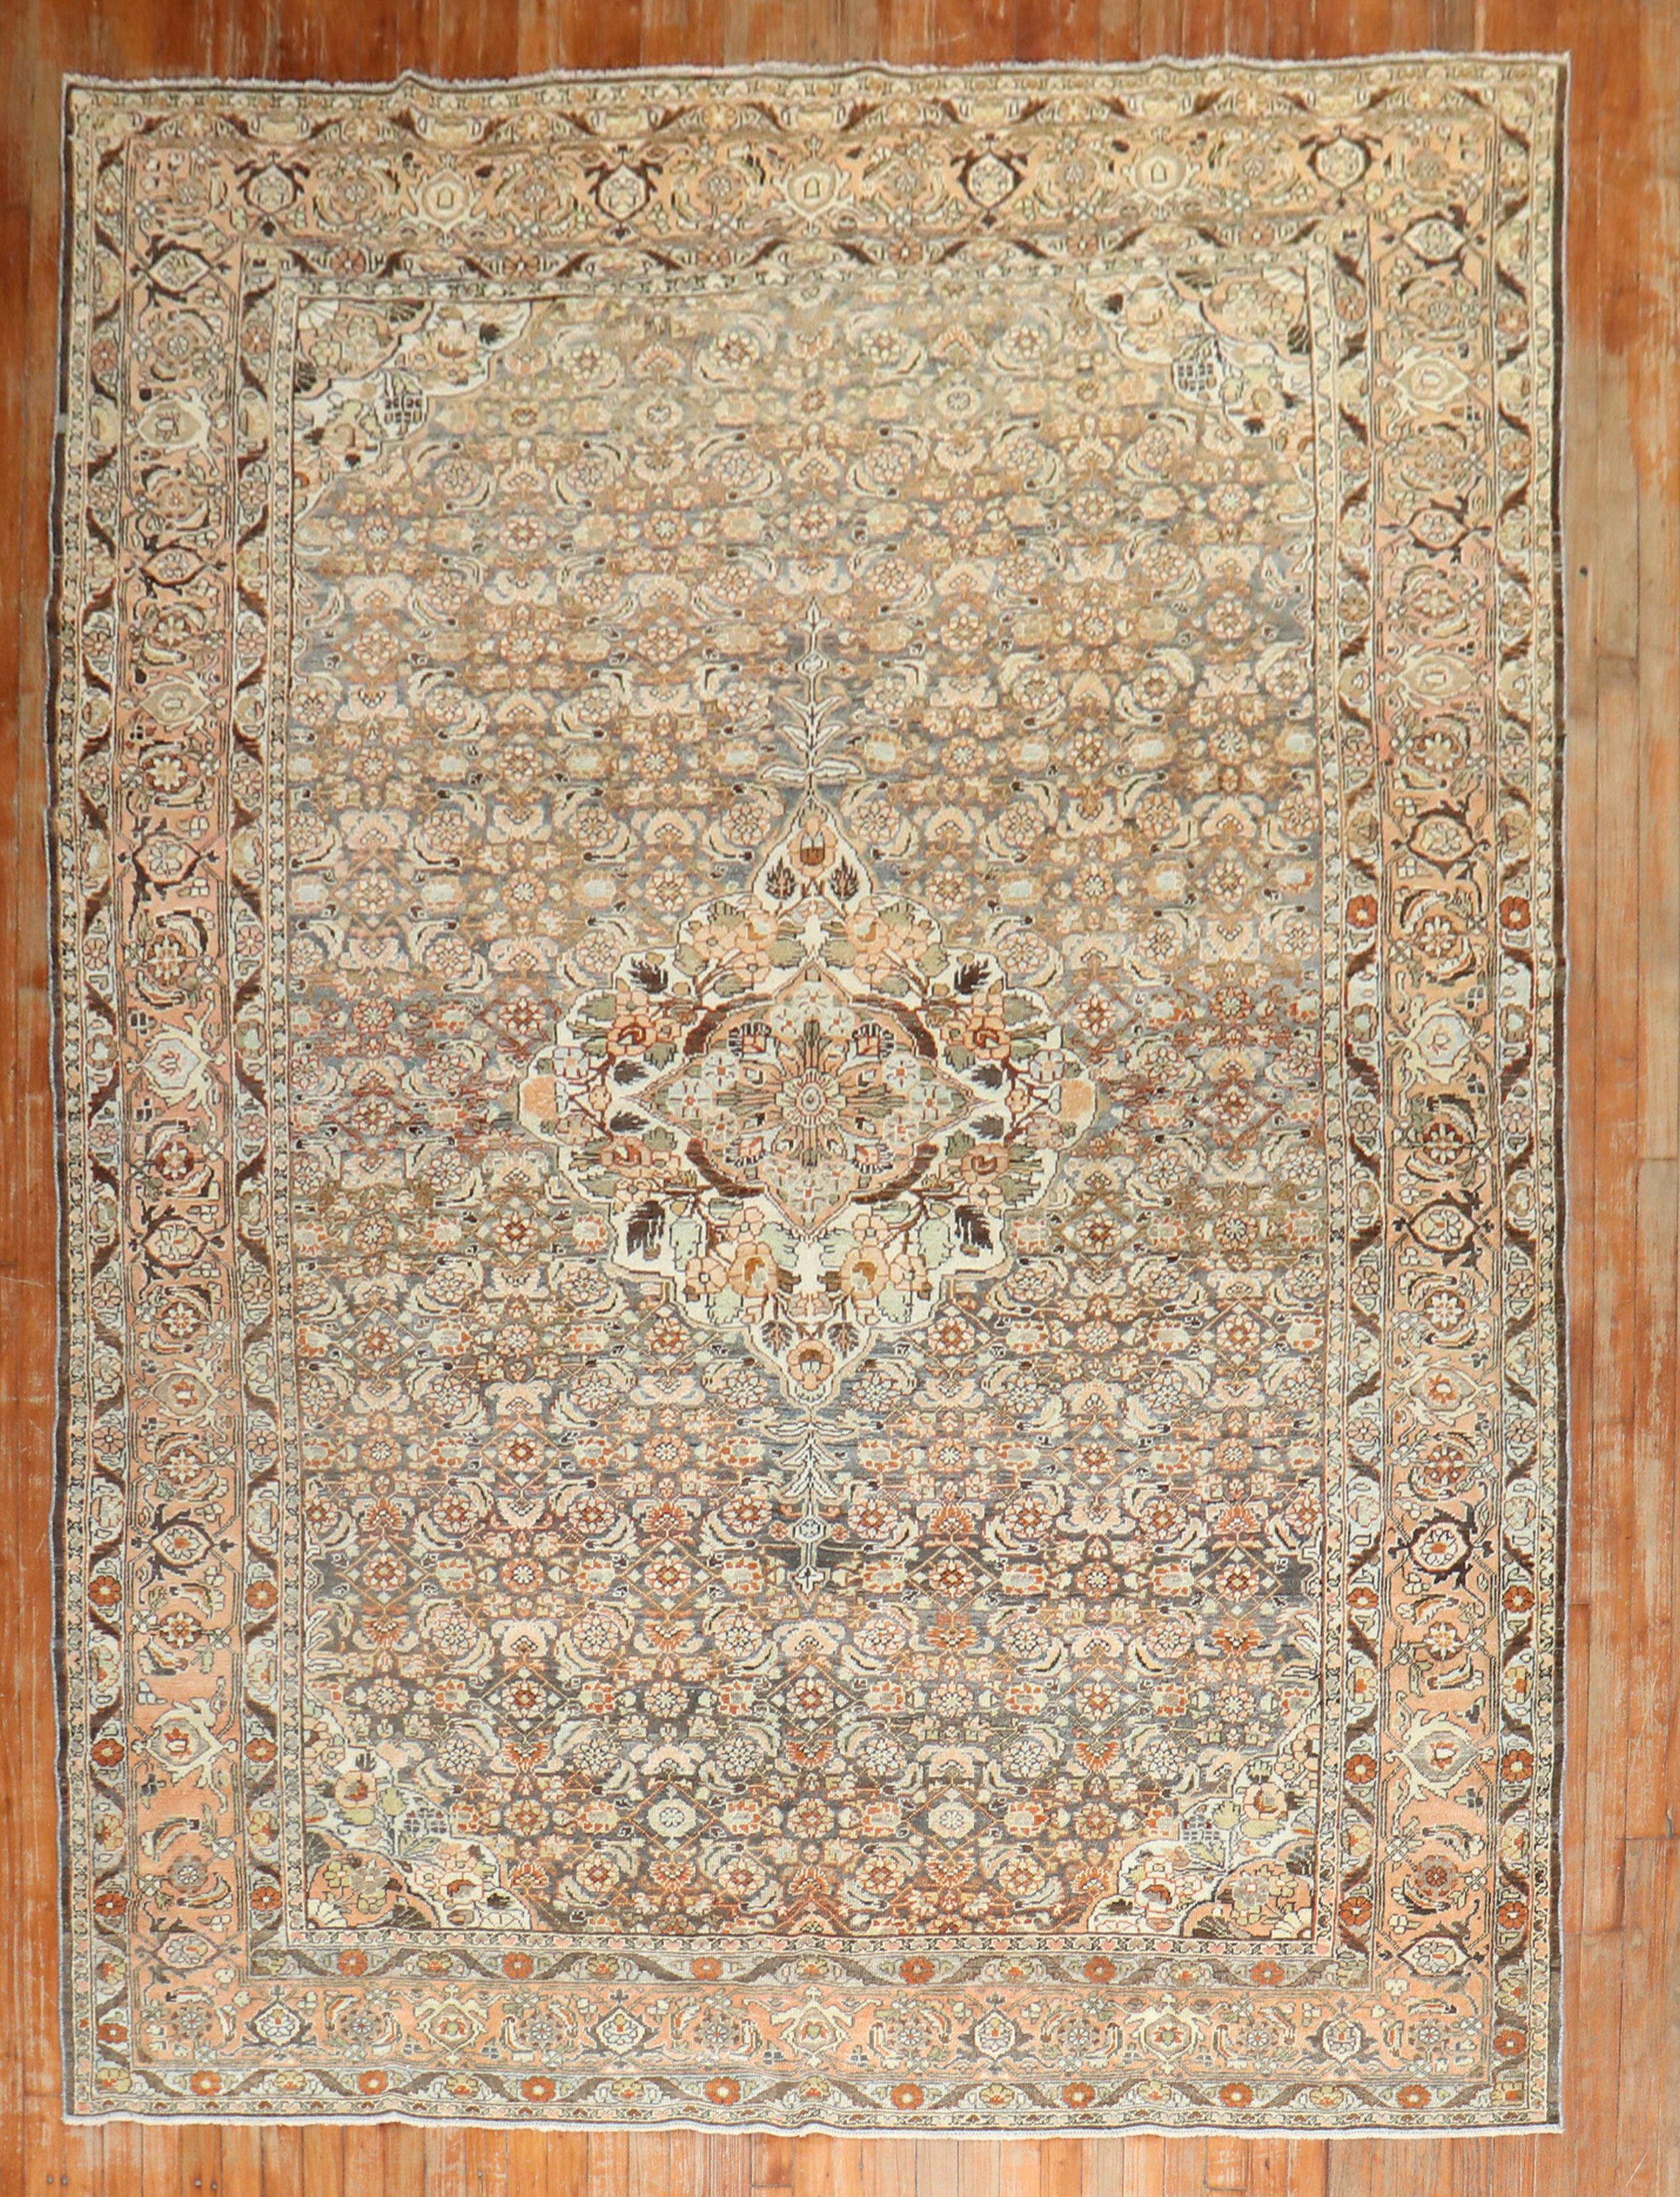 Small Room size early 20th century antique Persian Malayer rug

Measures: 6'11